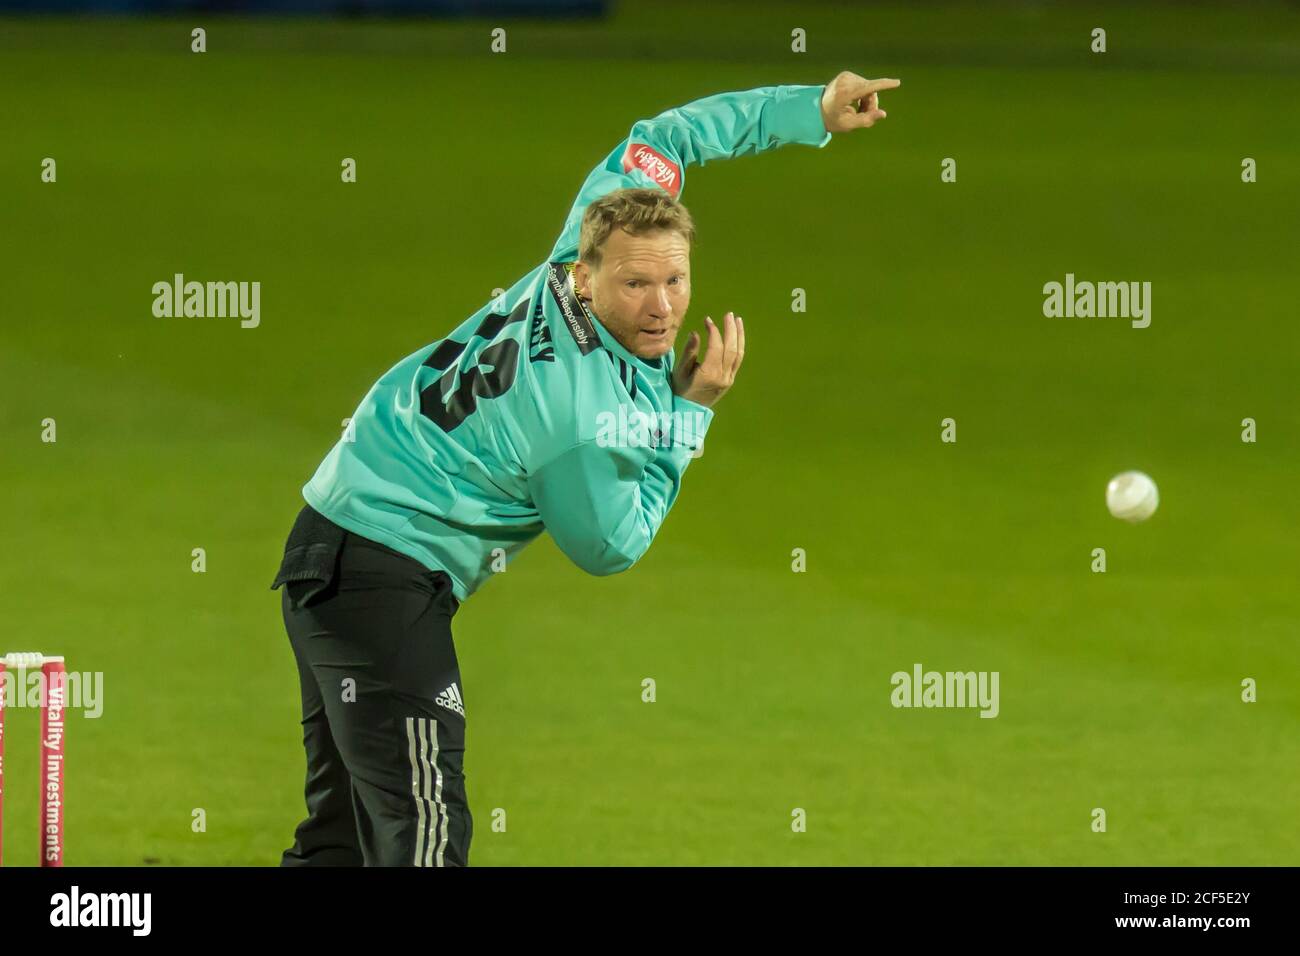 London, UK. 3 September, 2020. Gareth Batty bowling as Surrey take on Hampshire in the Vitality T20 Blast match at the Kia Oval. David Rowe/Alamy Live News Stock Photo